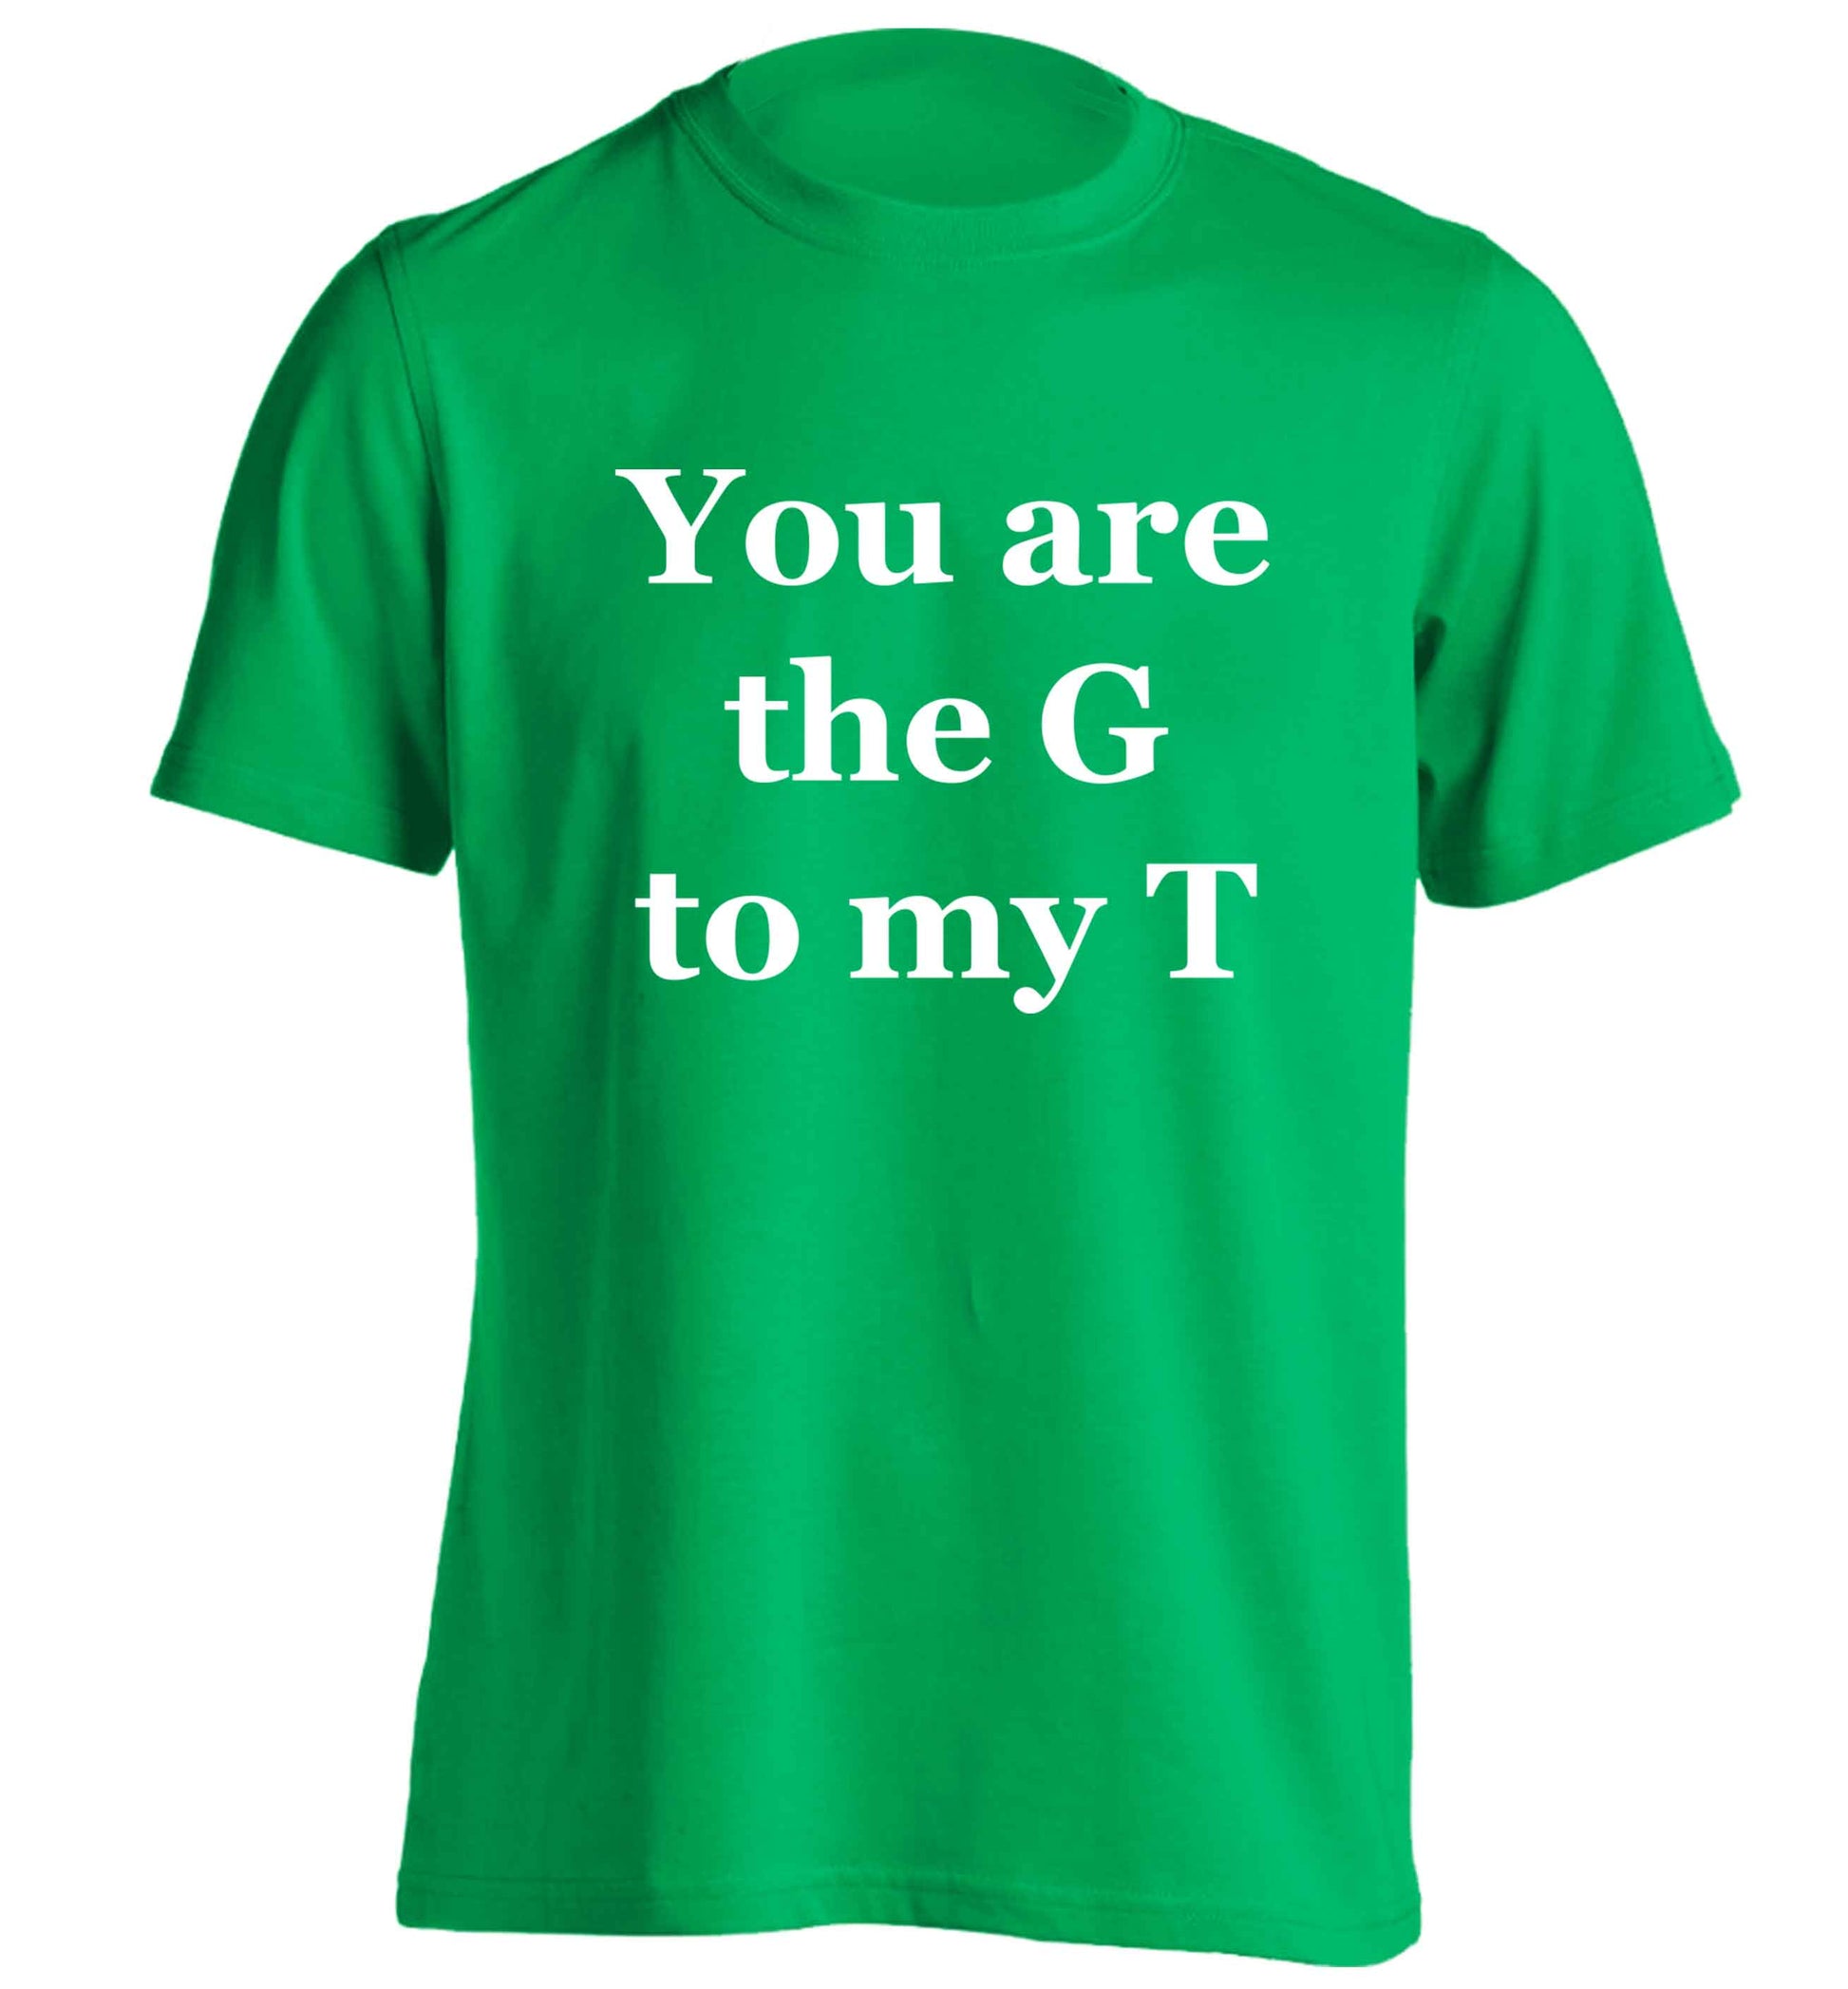 You are the G to my T adults unisex green Tshirt 2XL